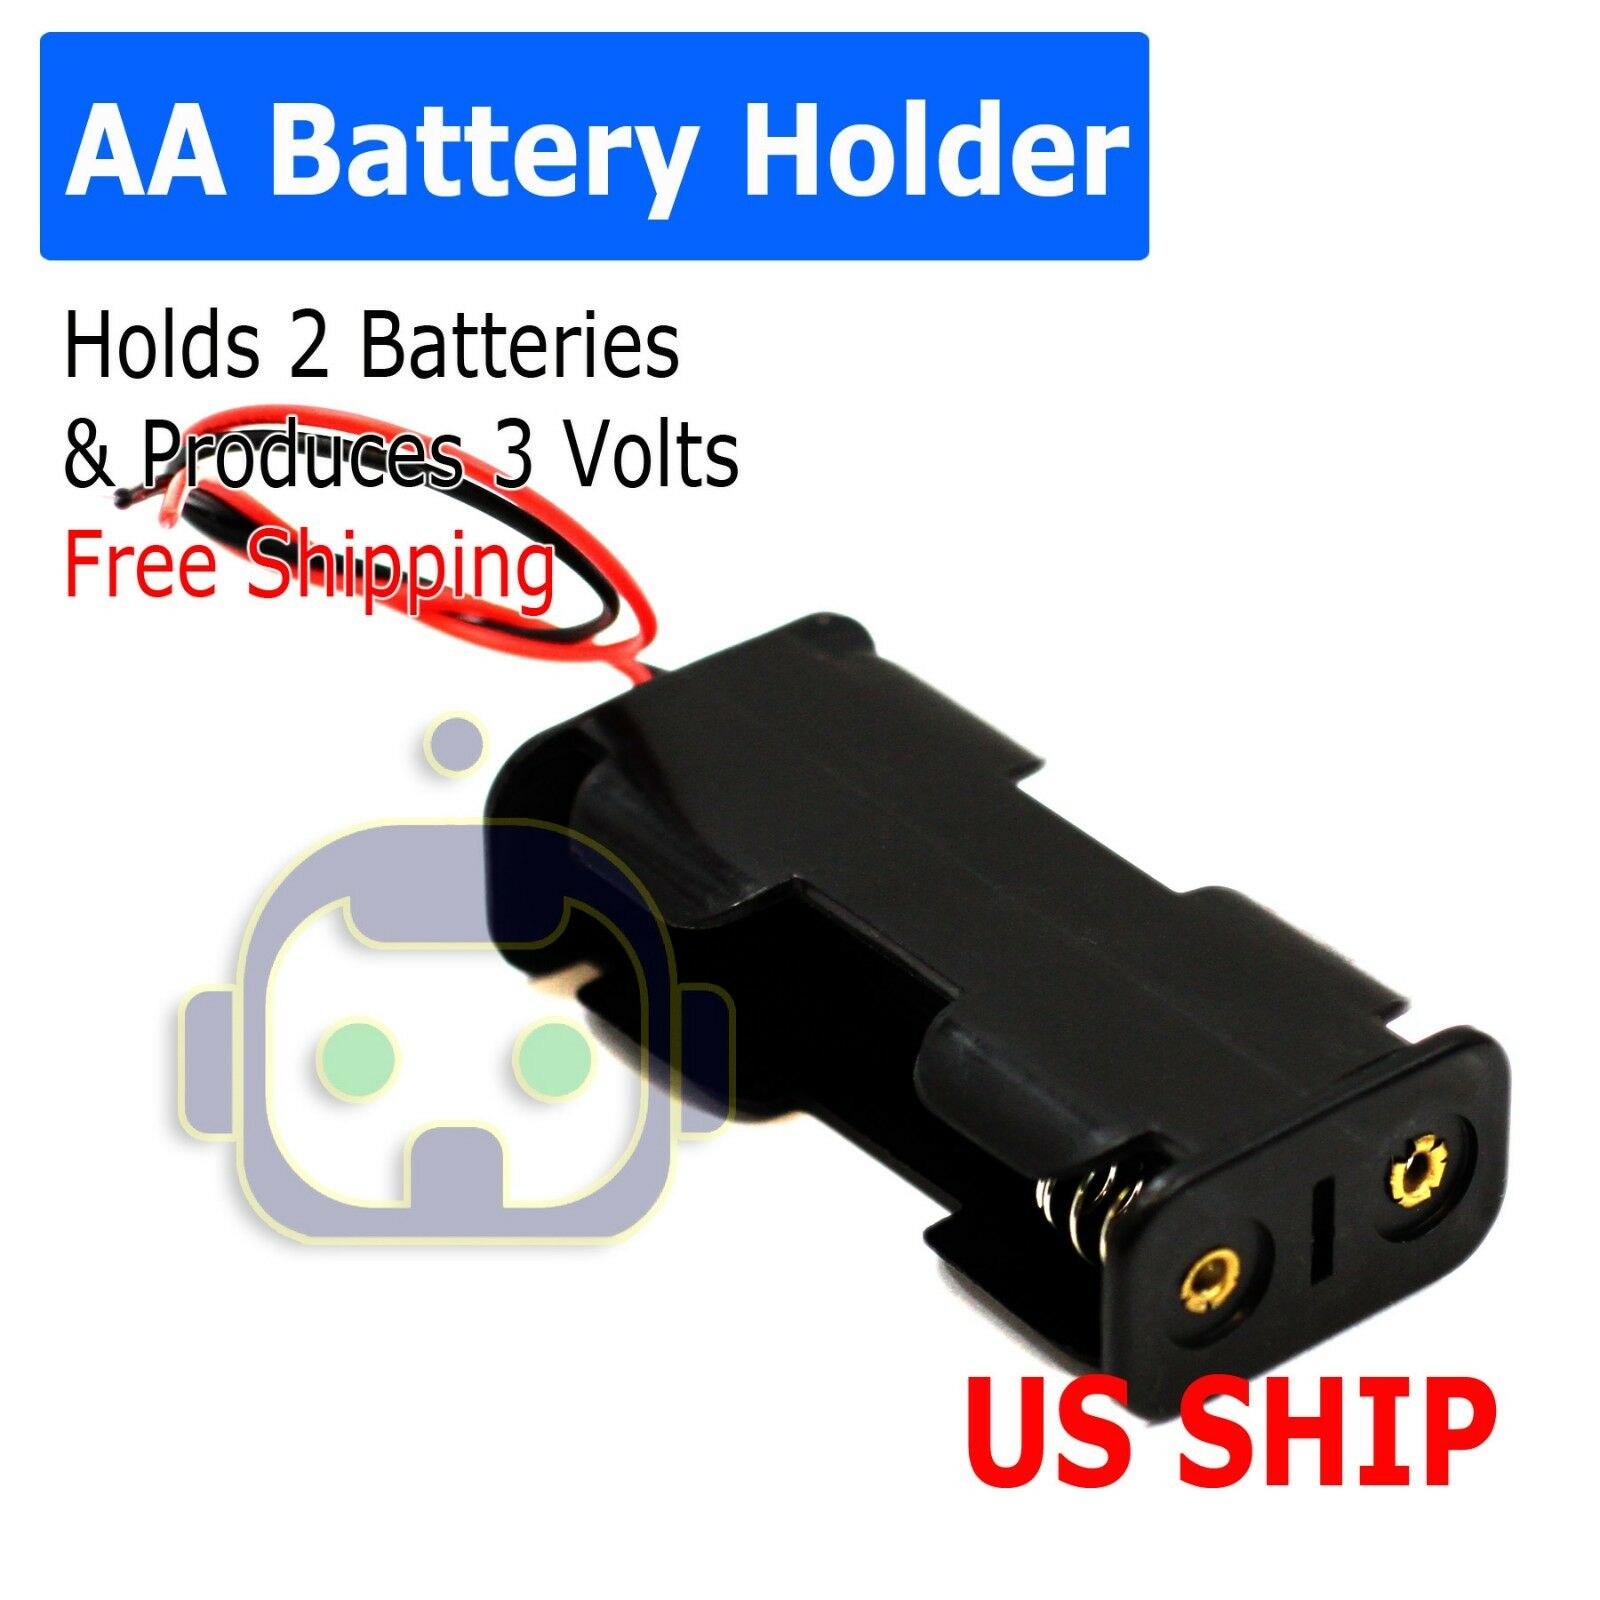 Battery Holder Case Box With 3" Wire Leads For 2x Series Aa Batteries 3v Us